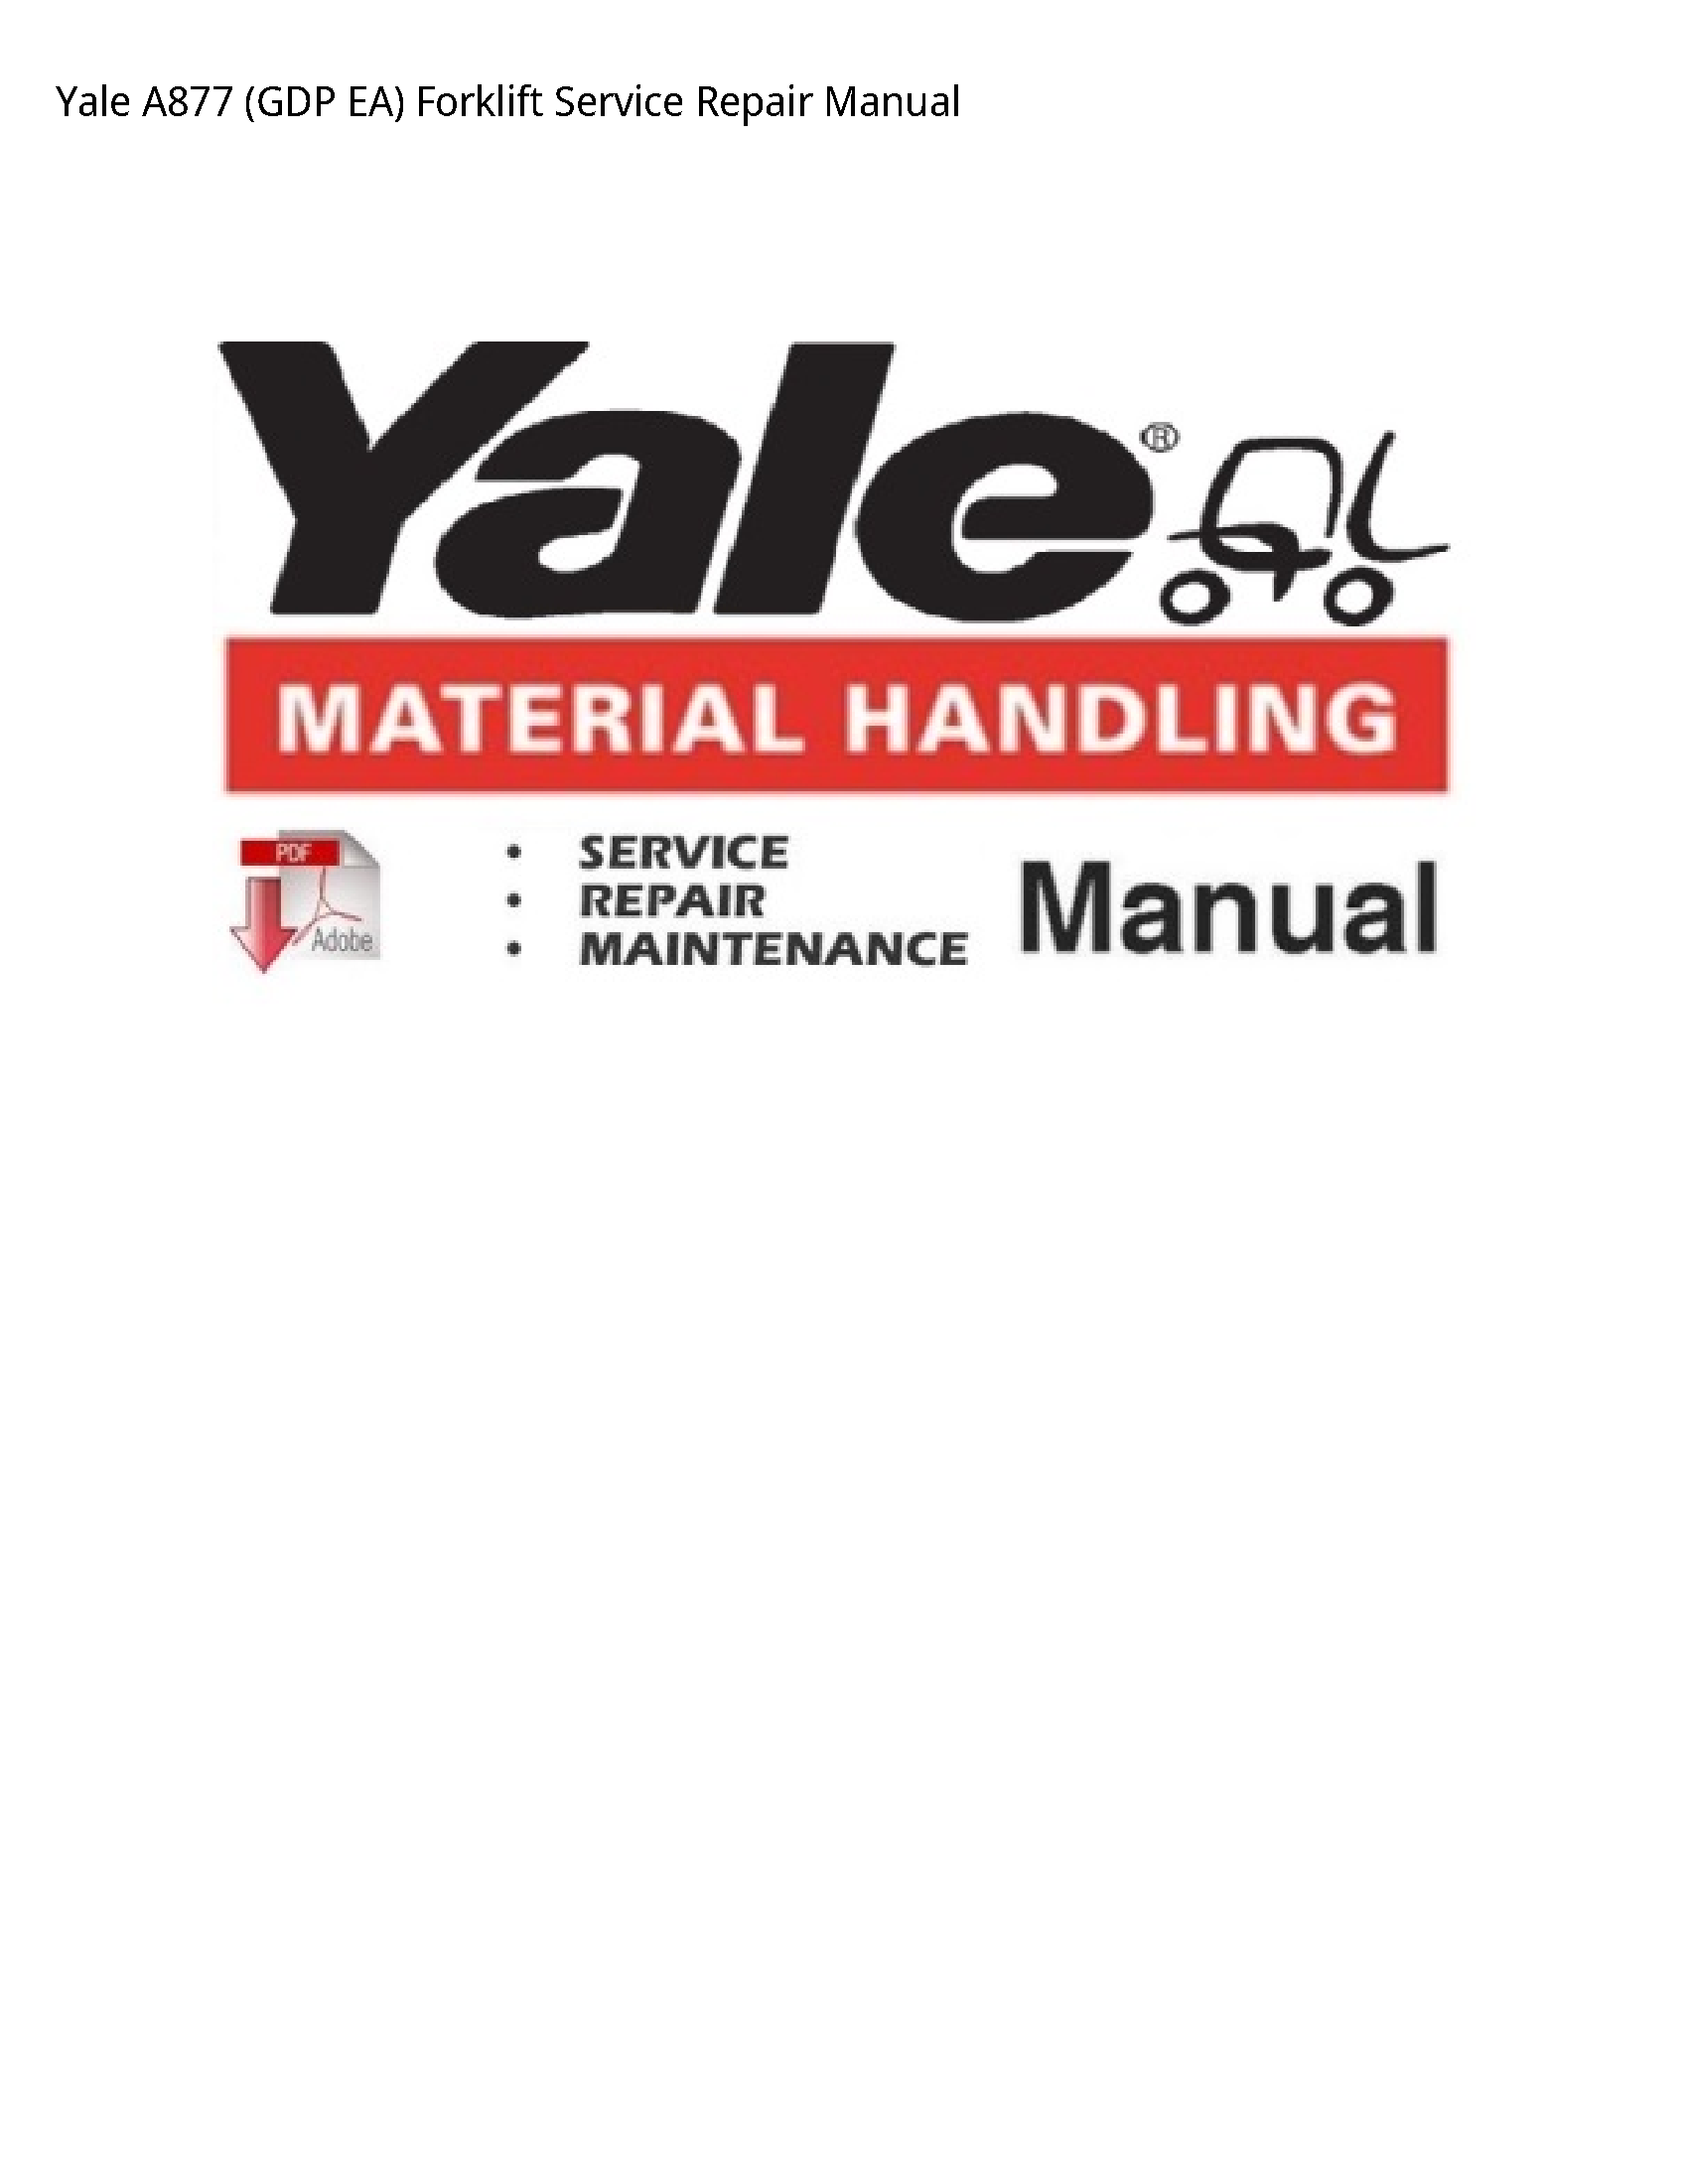 Yale A877 (GDP EA) Forklift manual